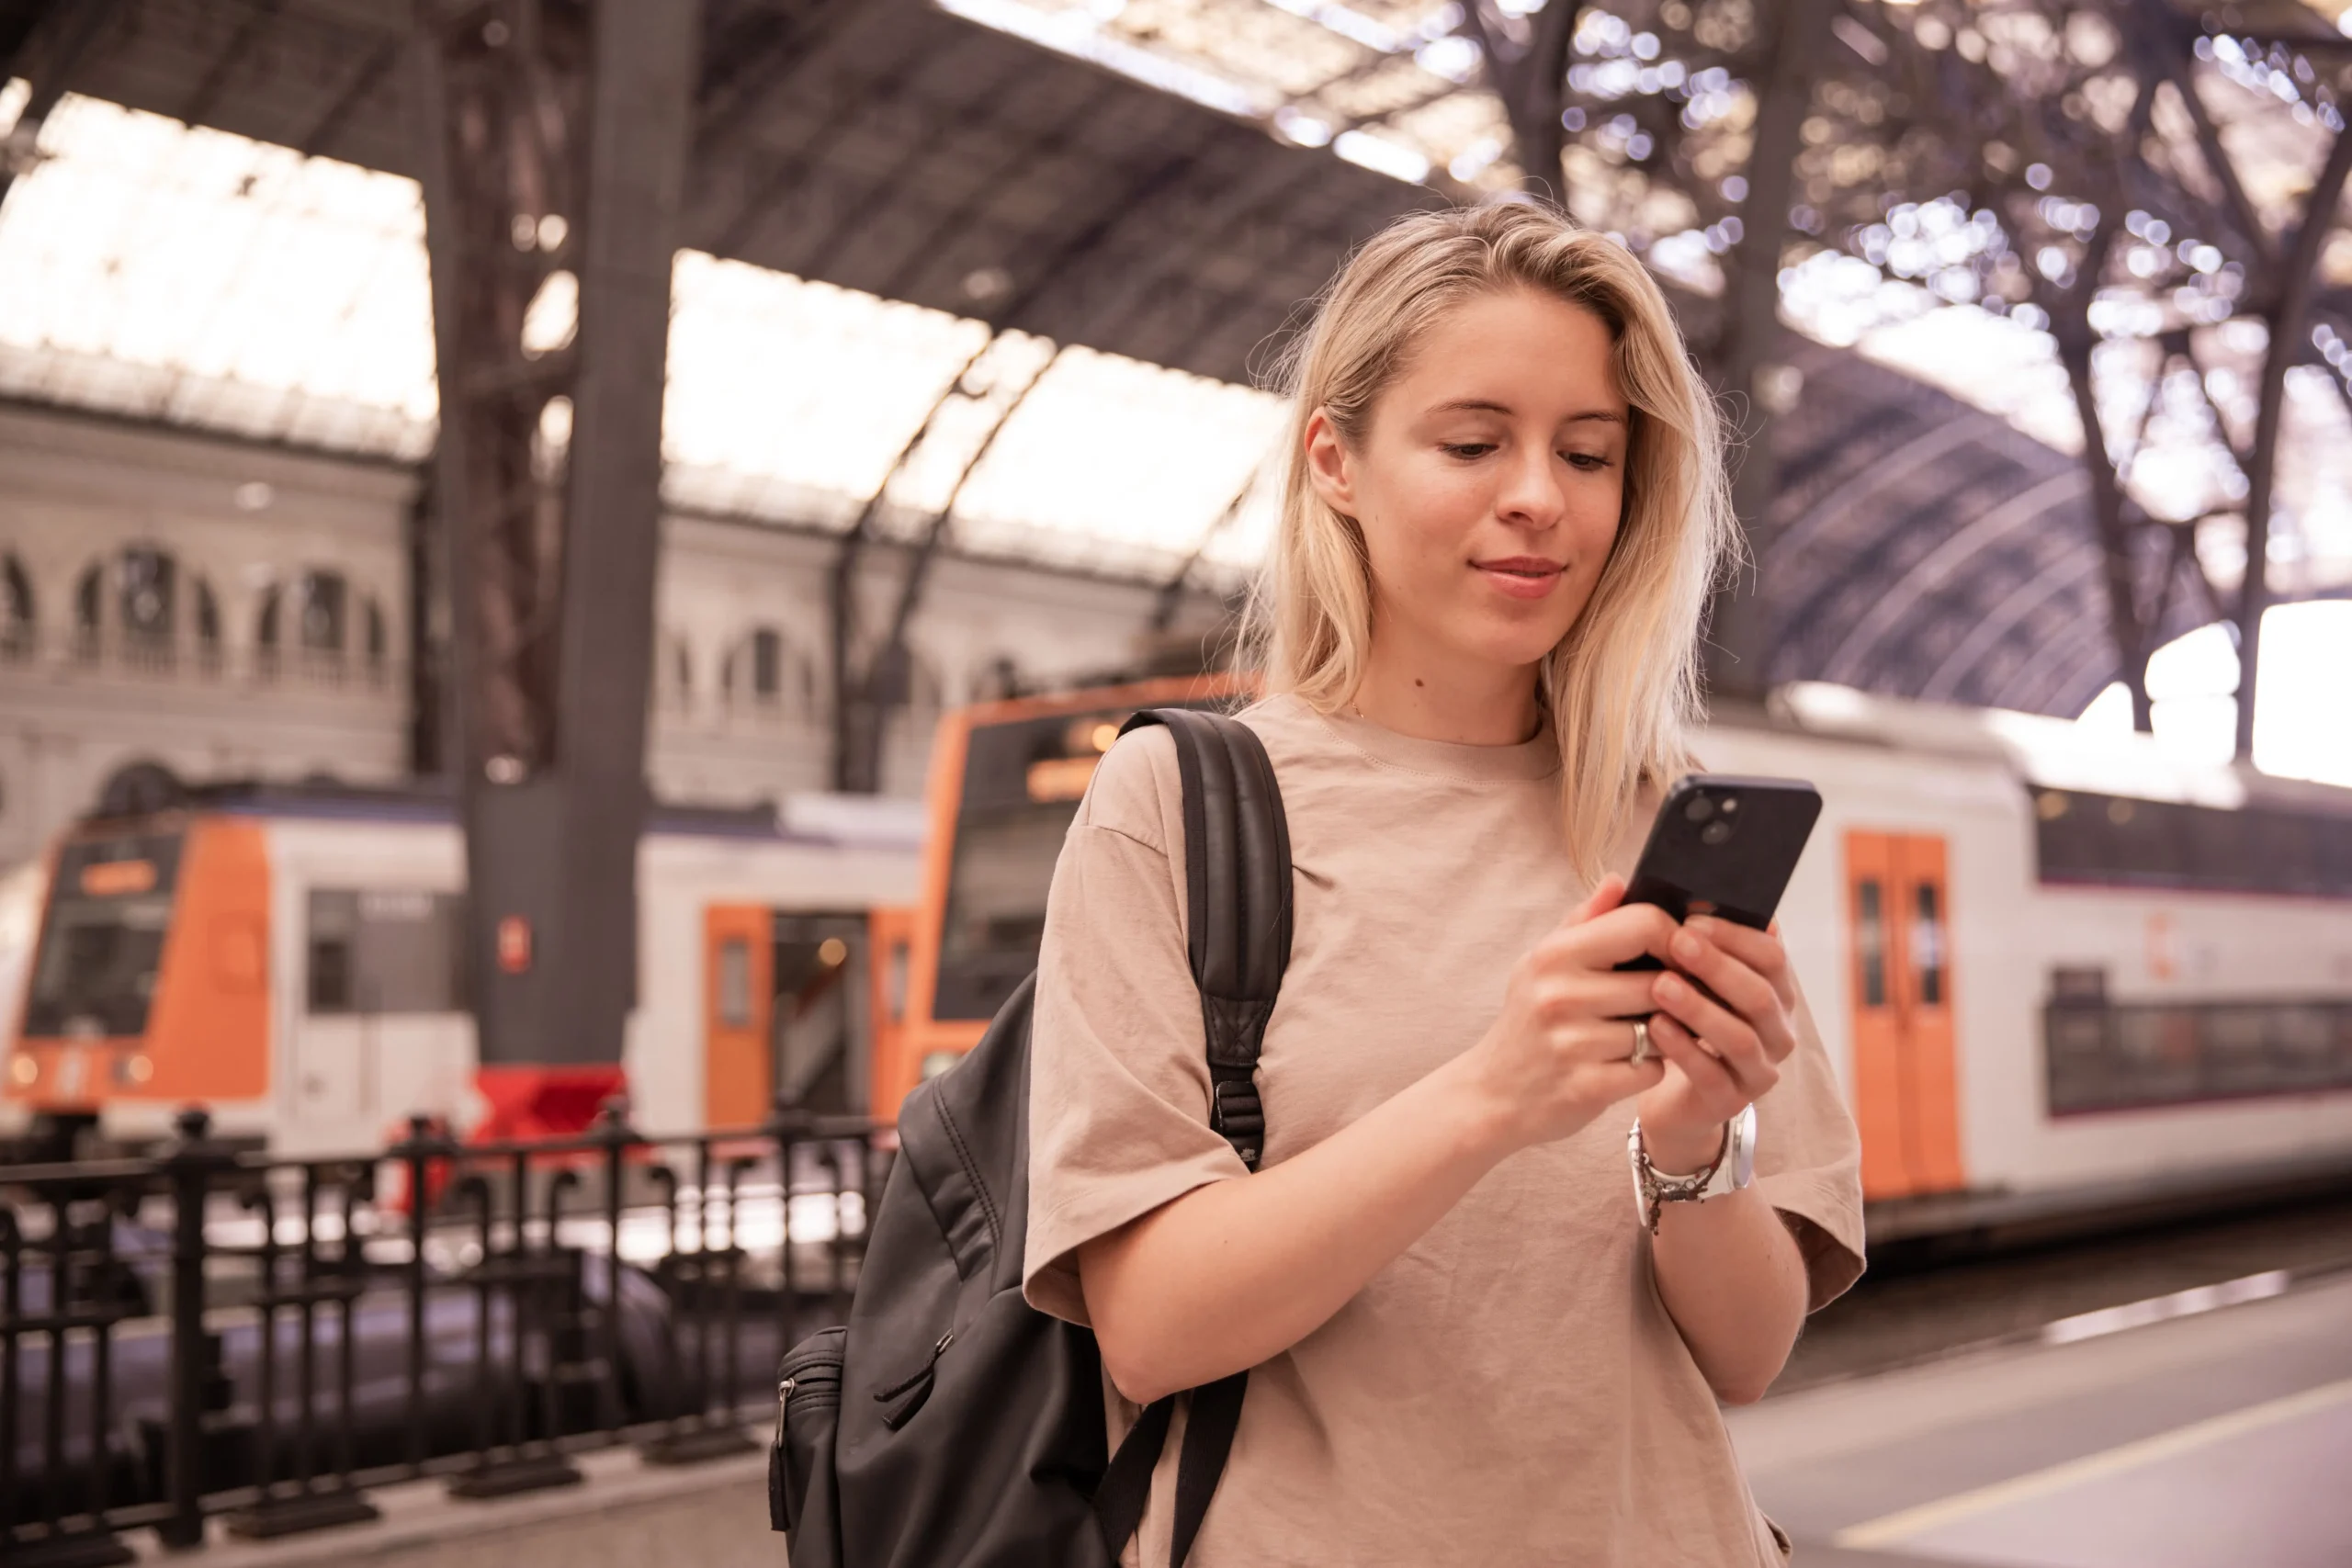 A girl at a train station is searching on her phone for the best train for her.